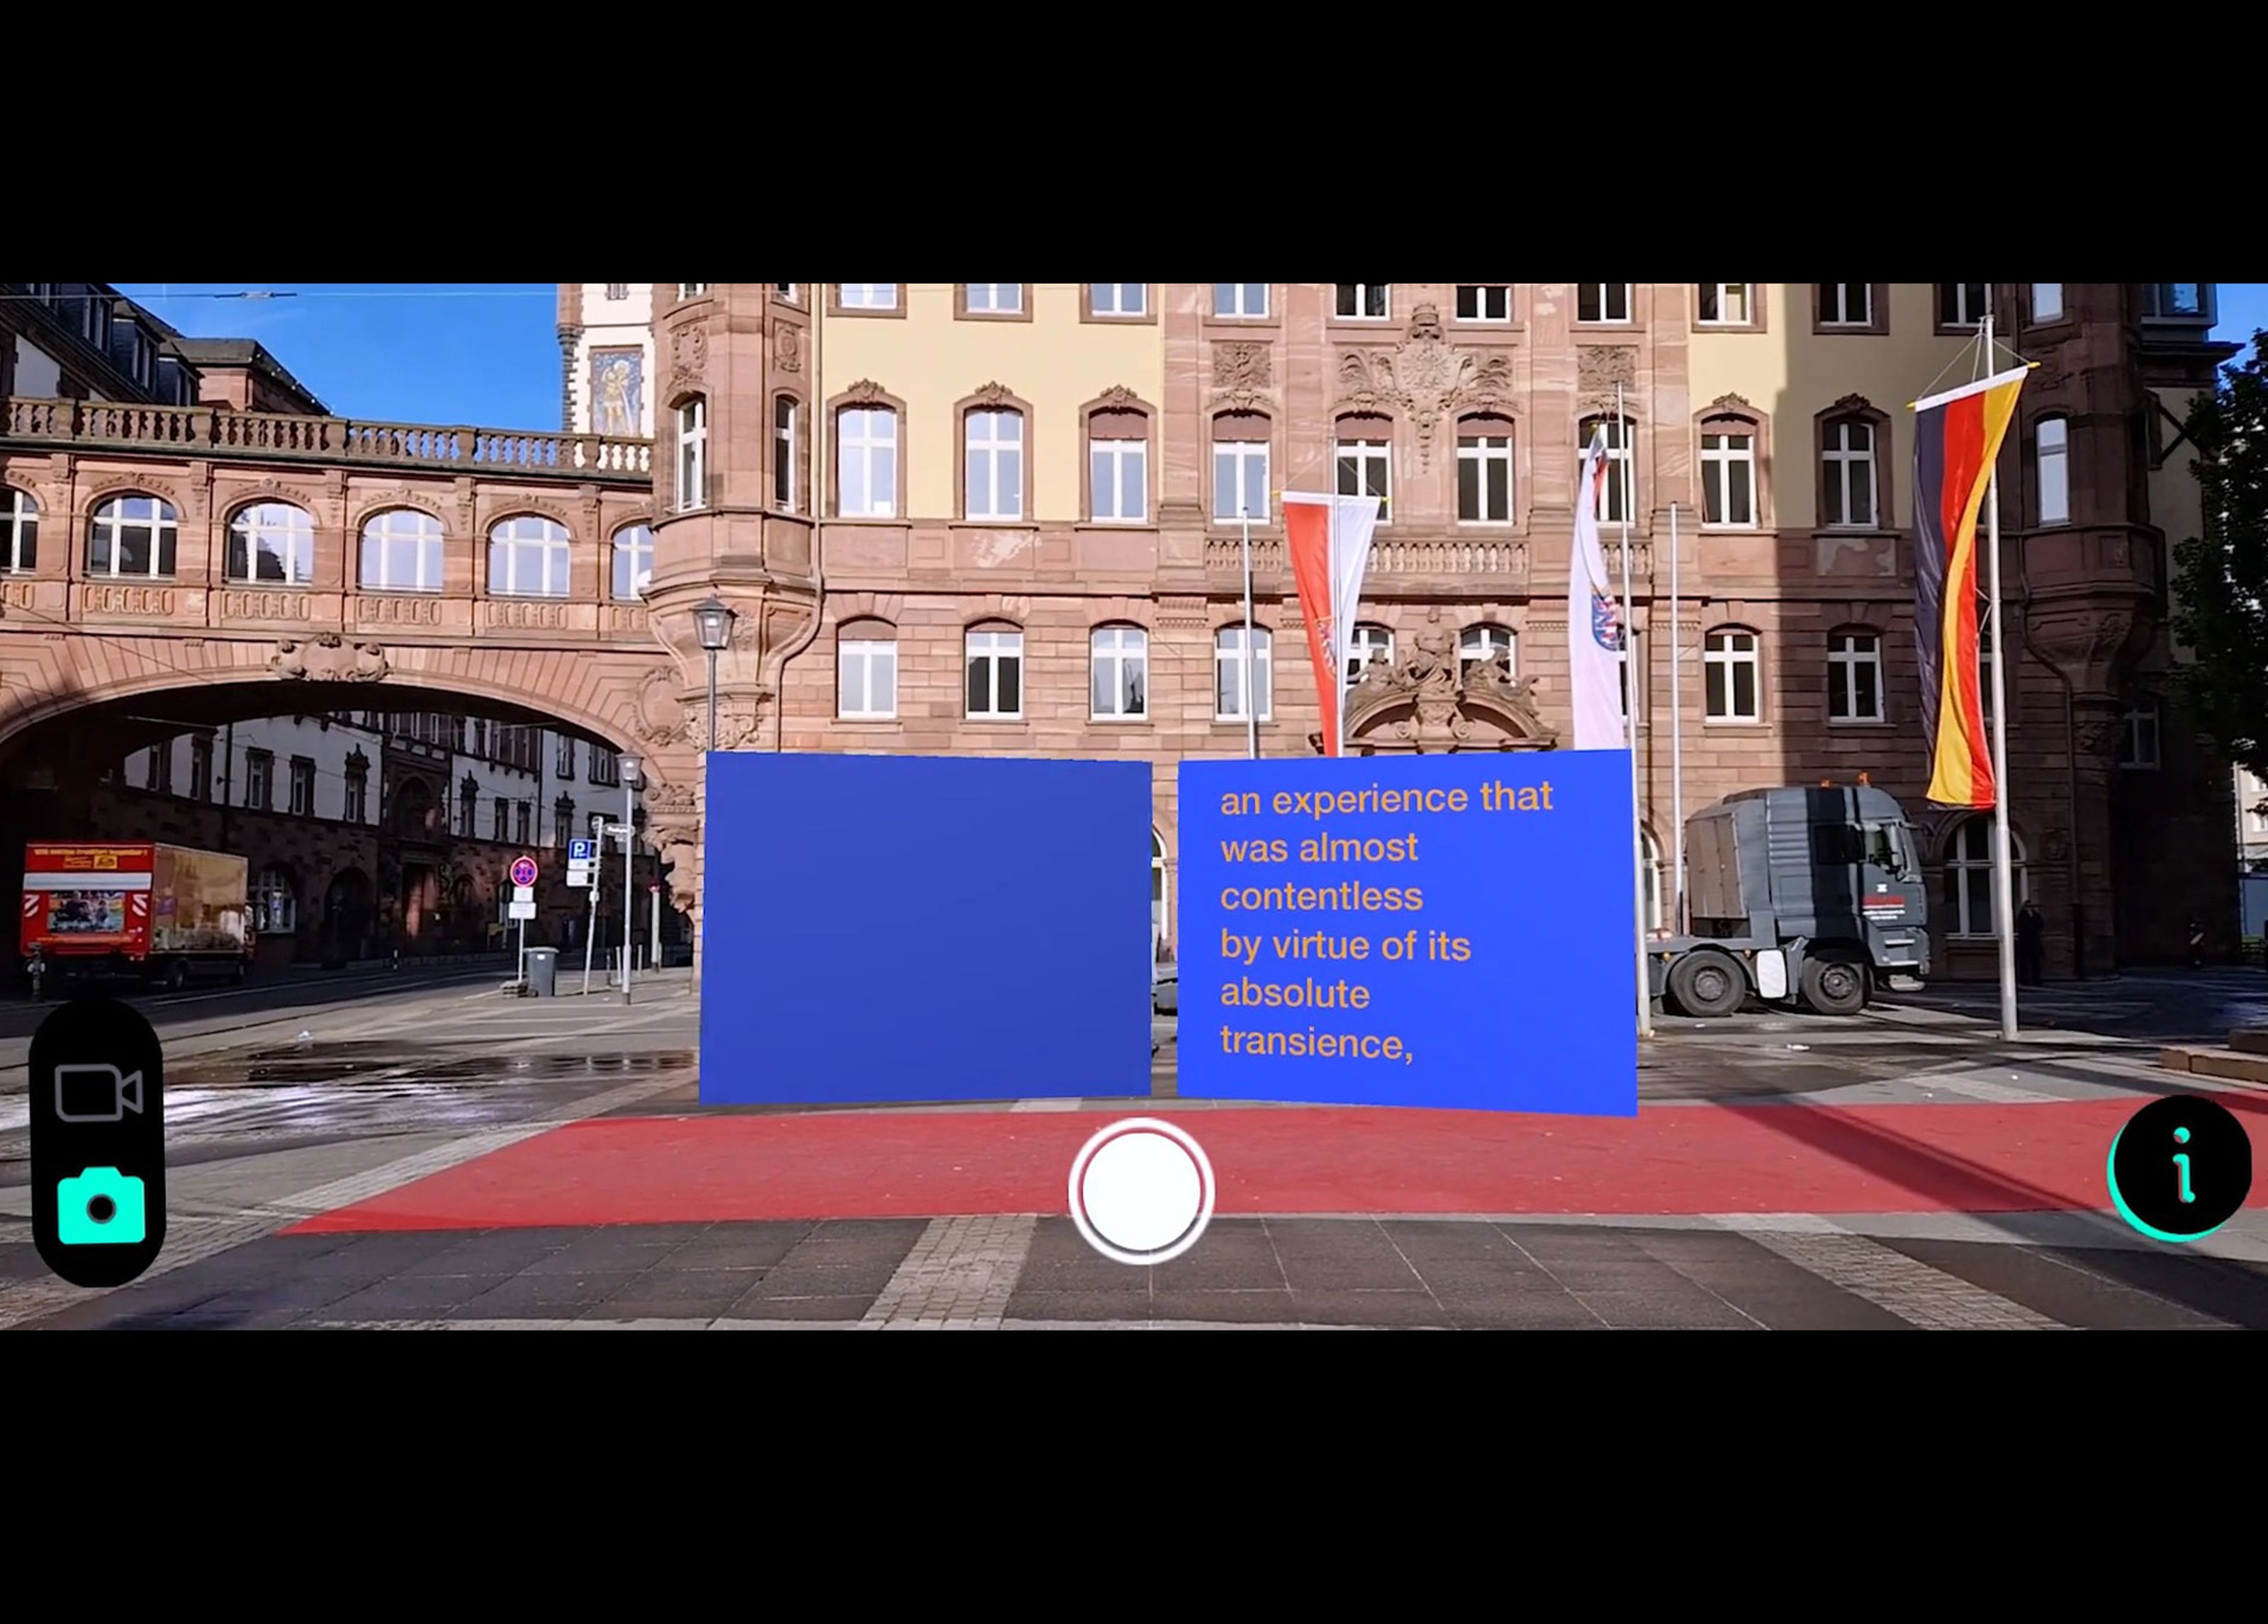 Two big AI screens placed in a square in the city, "an experience was almost contentless by virtue of its absolute transience," is written on one of them in white on bright blue color.